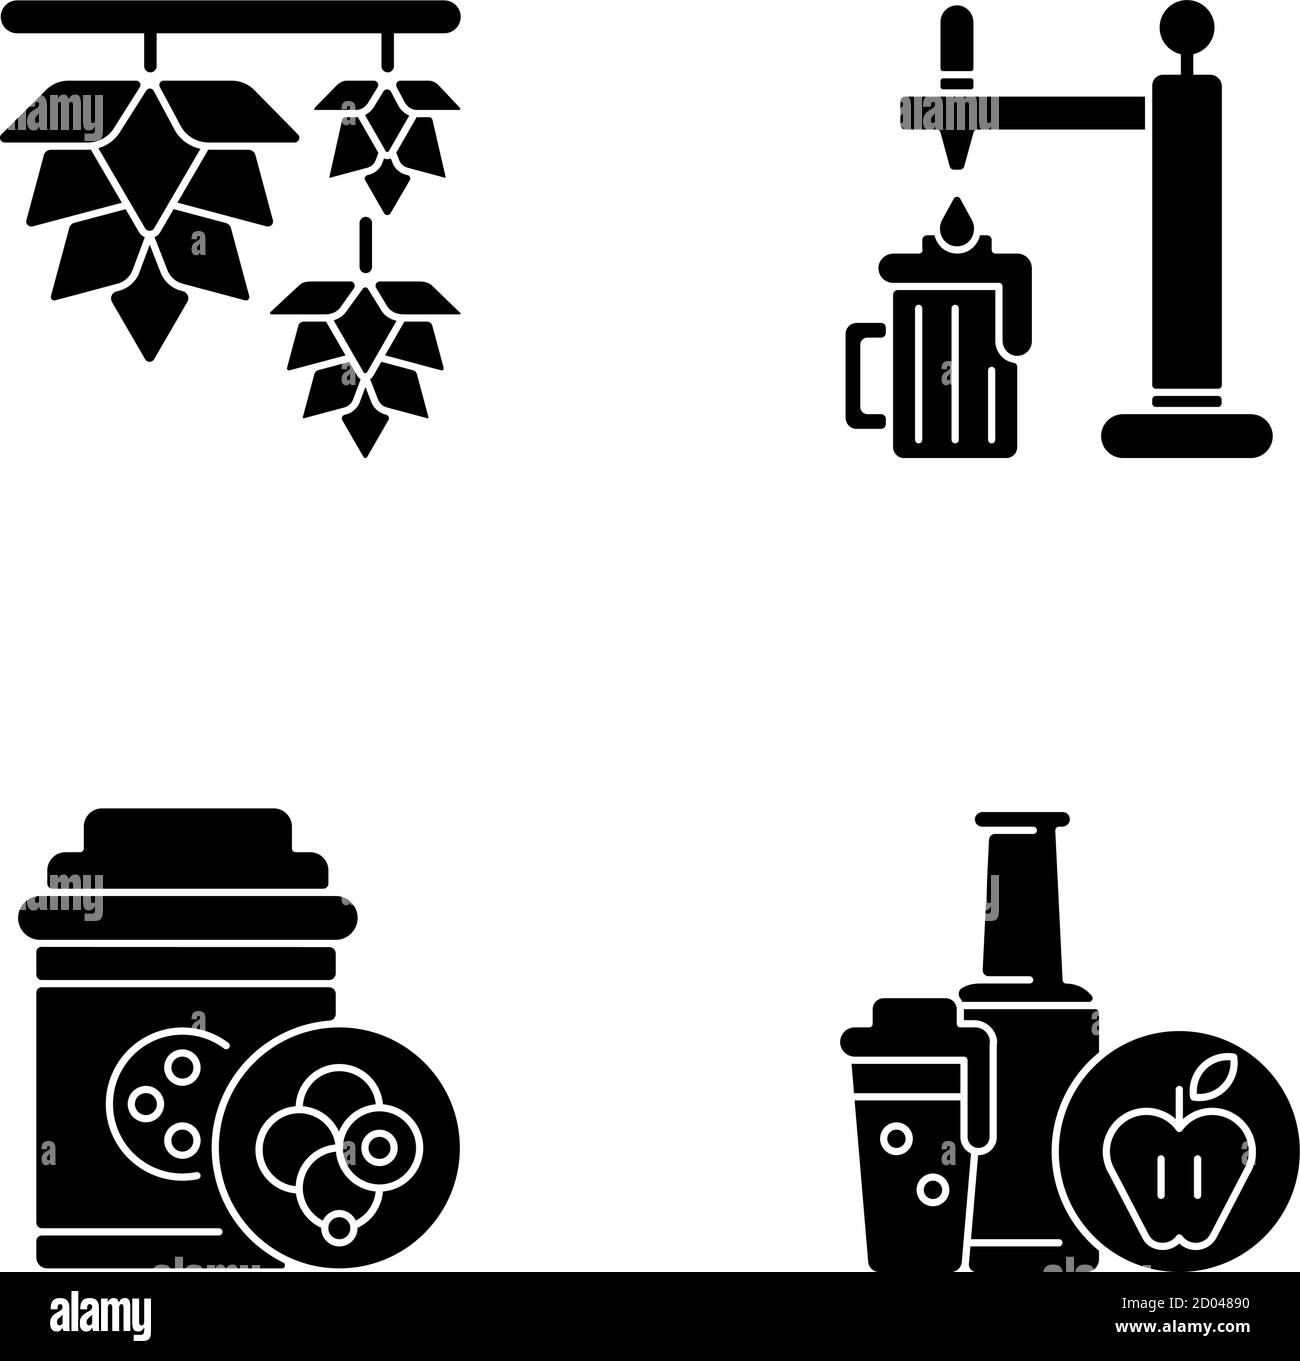 Beer drink black glyph icons set on white space Stock Vector